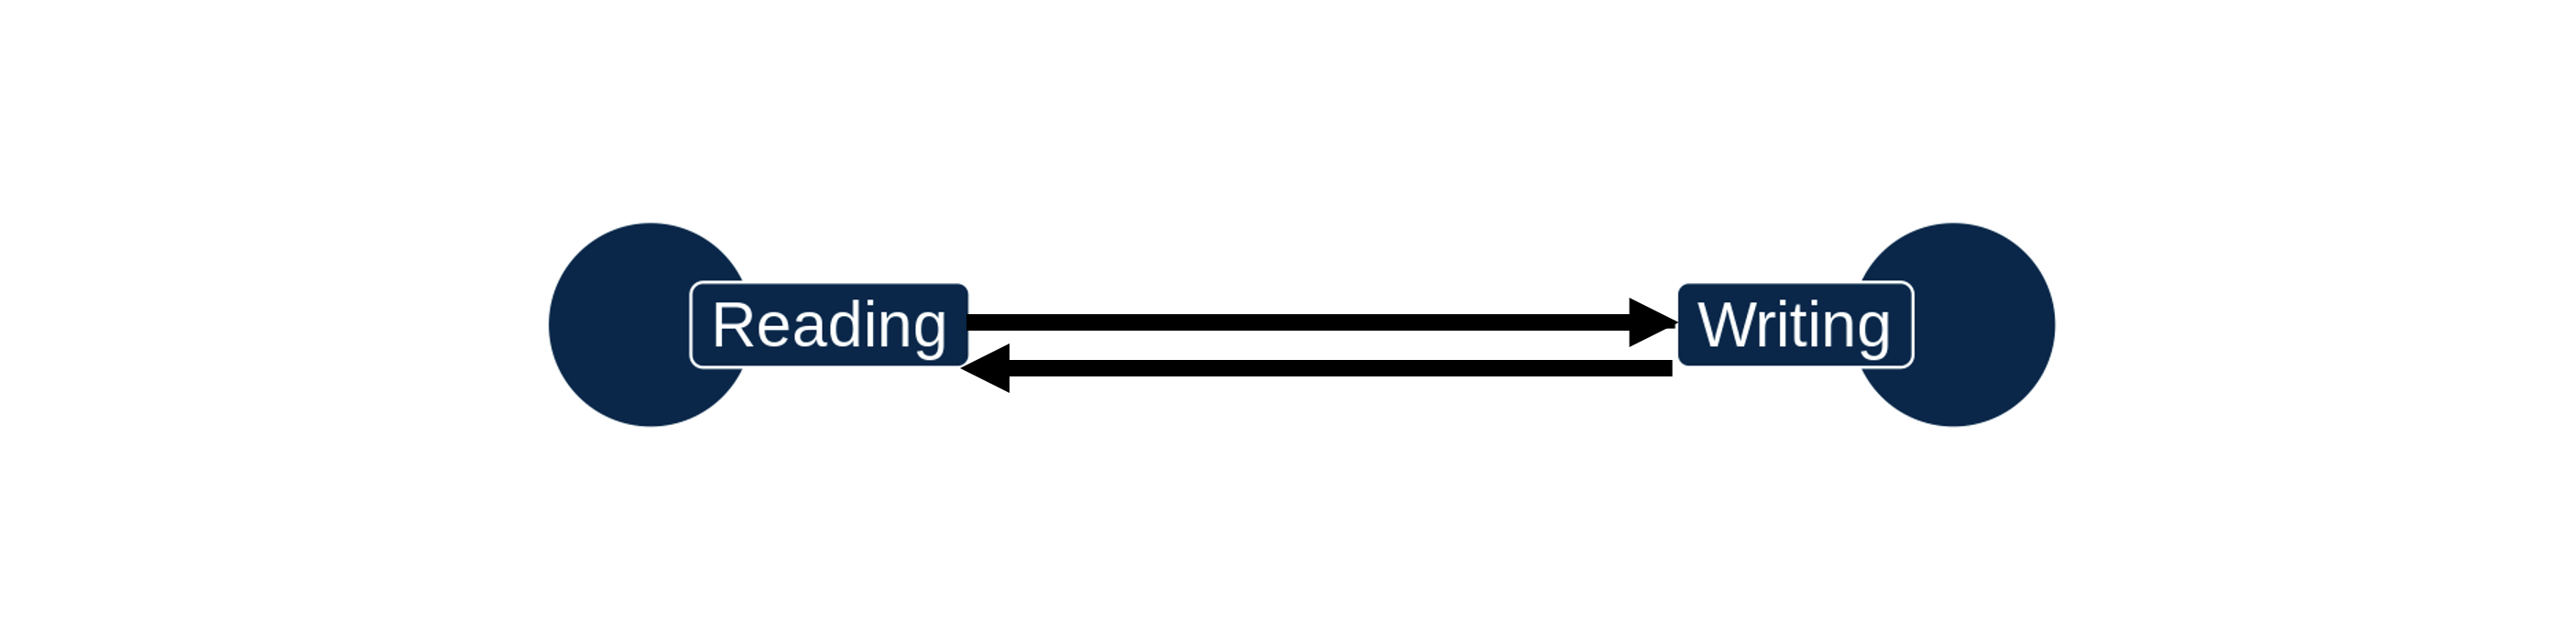 On the left, a circle is labeled as Reading with an arrow pointing from it to a circle on the right labeled as Writing. An arrow is also pointing from the Writing circle to the Reading circle.